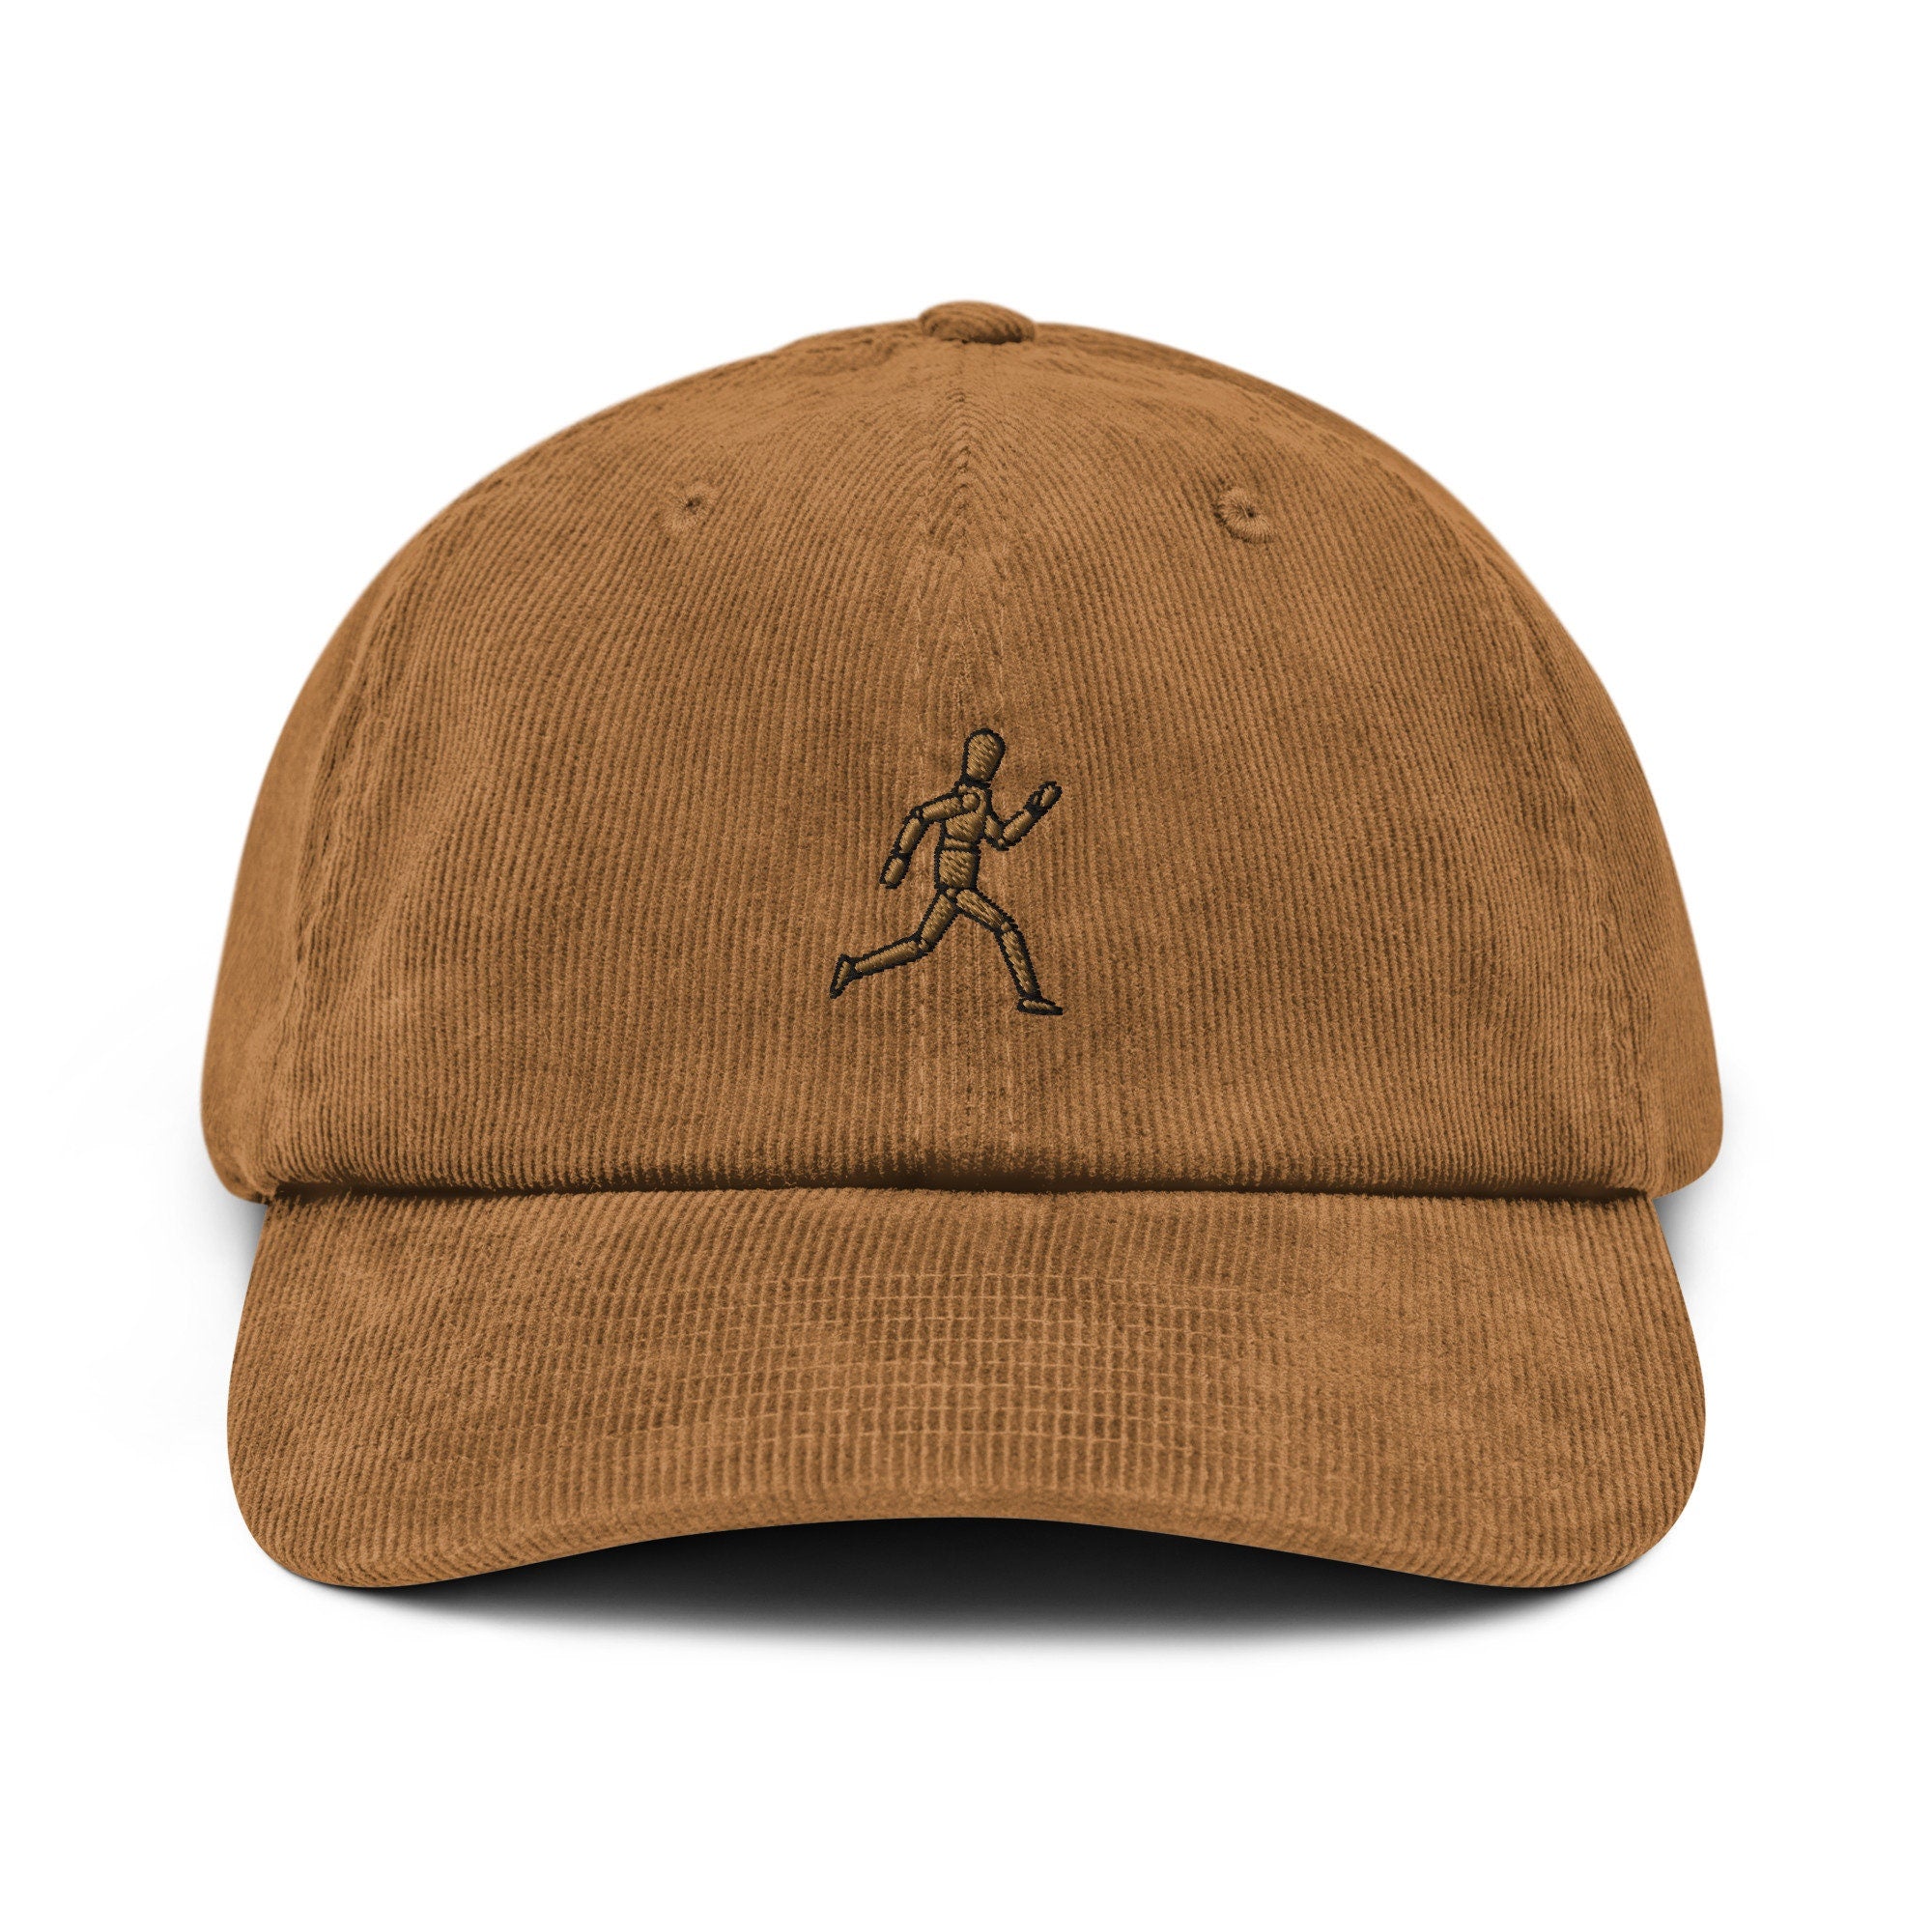 Sketching Mannequin Corduroy Hat, Handmade Embroidered Corduroy Dad Cap - Multiple Colors